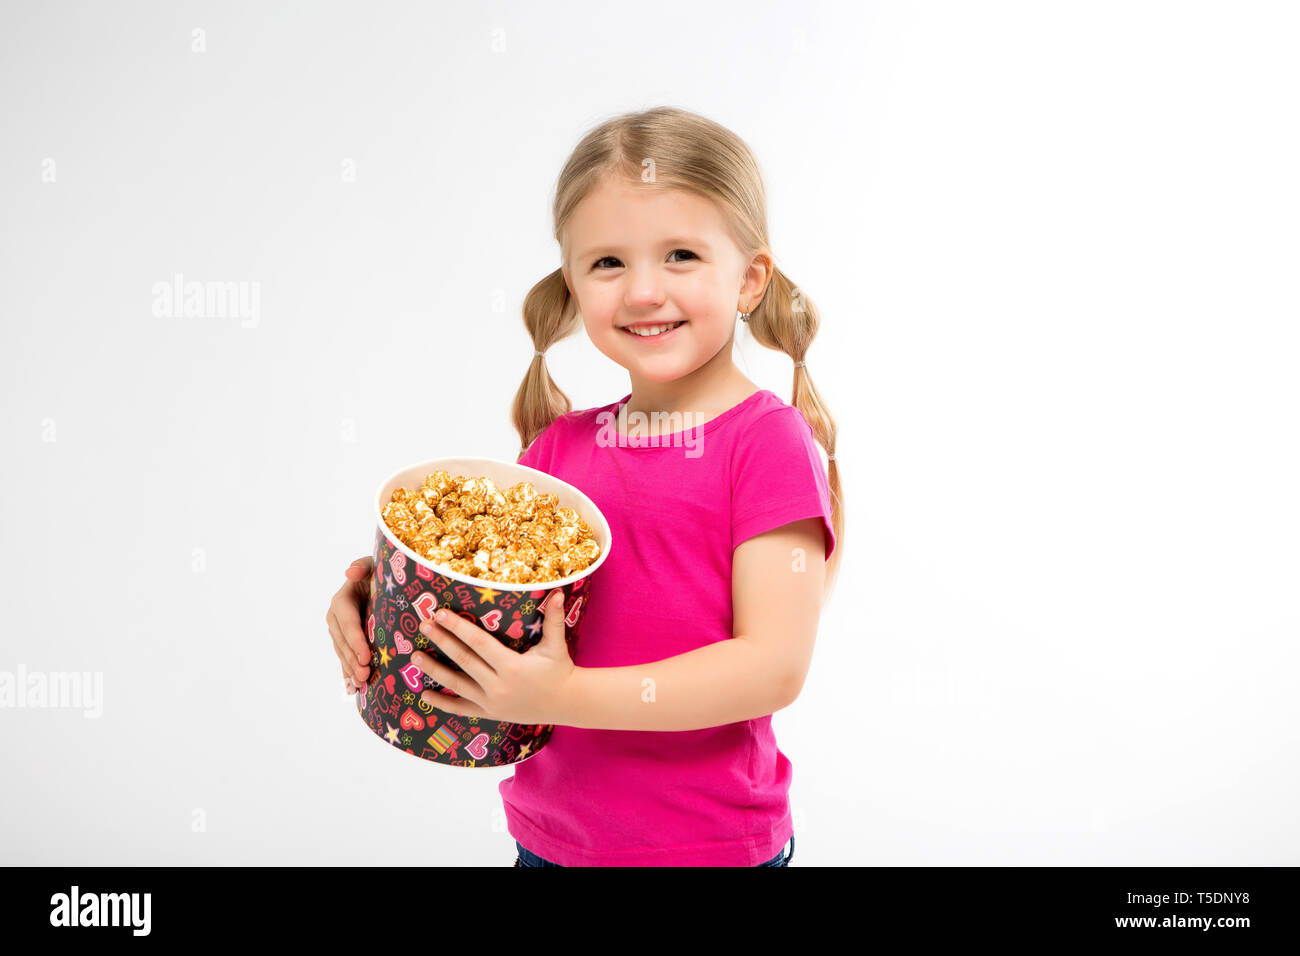 baby girl with popcorn on white isolate background.Little cute baby girl 3-4 years old holding a bucket for popcorn, Kids childhood lifestyle concept. Stock Photo